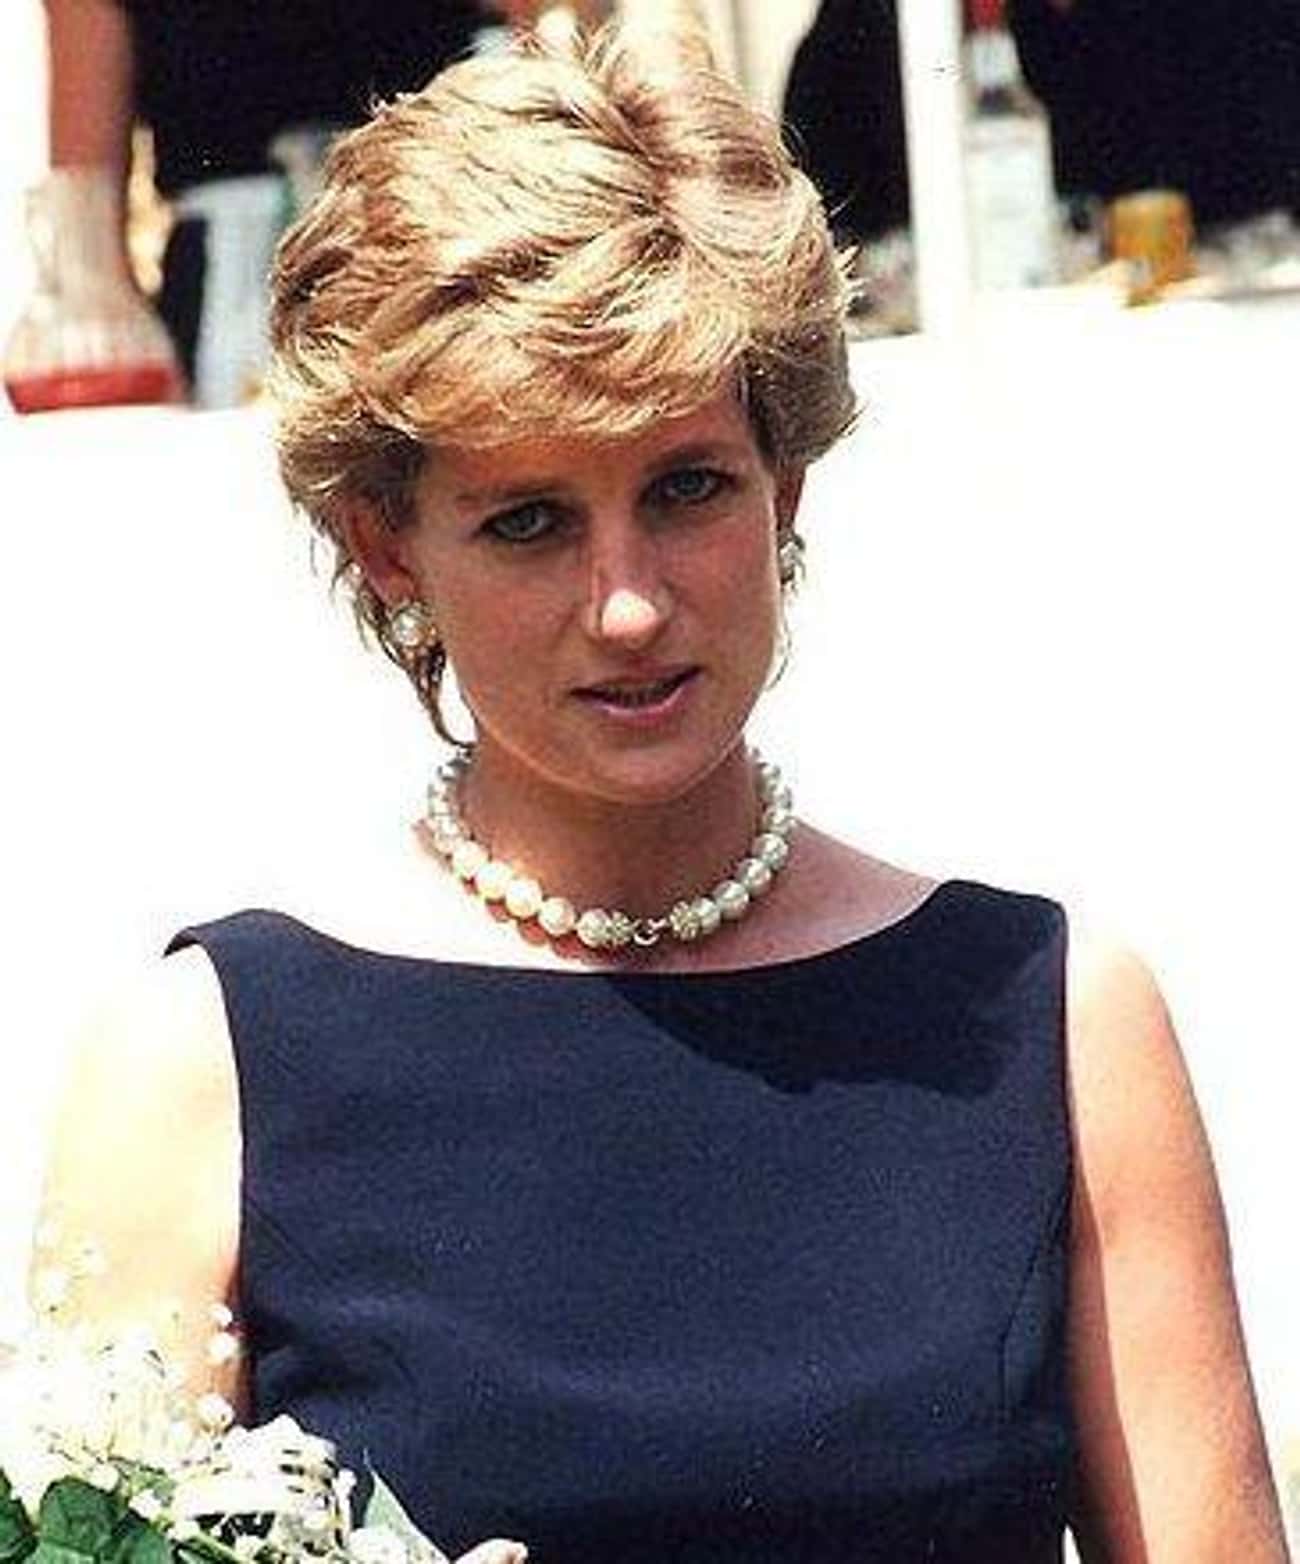 Jokes About Princess Diana And Scenes With Gianni Versace Had To Be Cut Due To Their Deaths